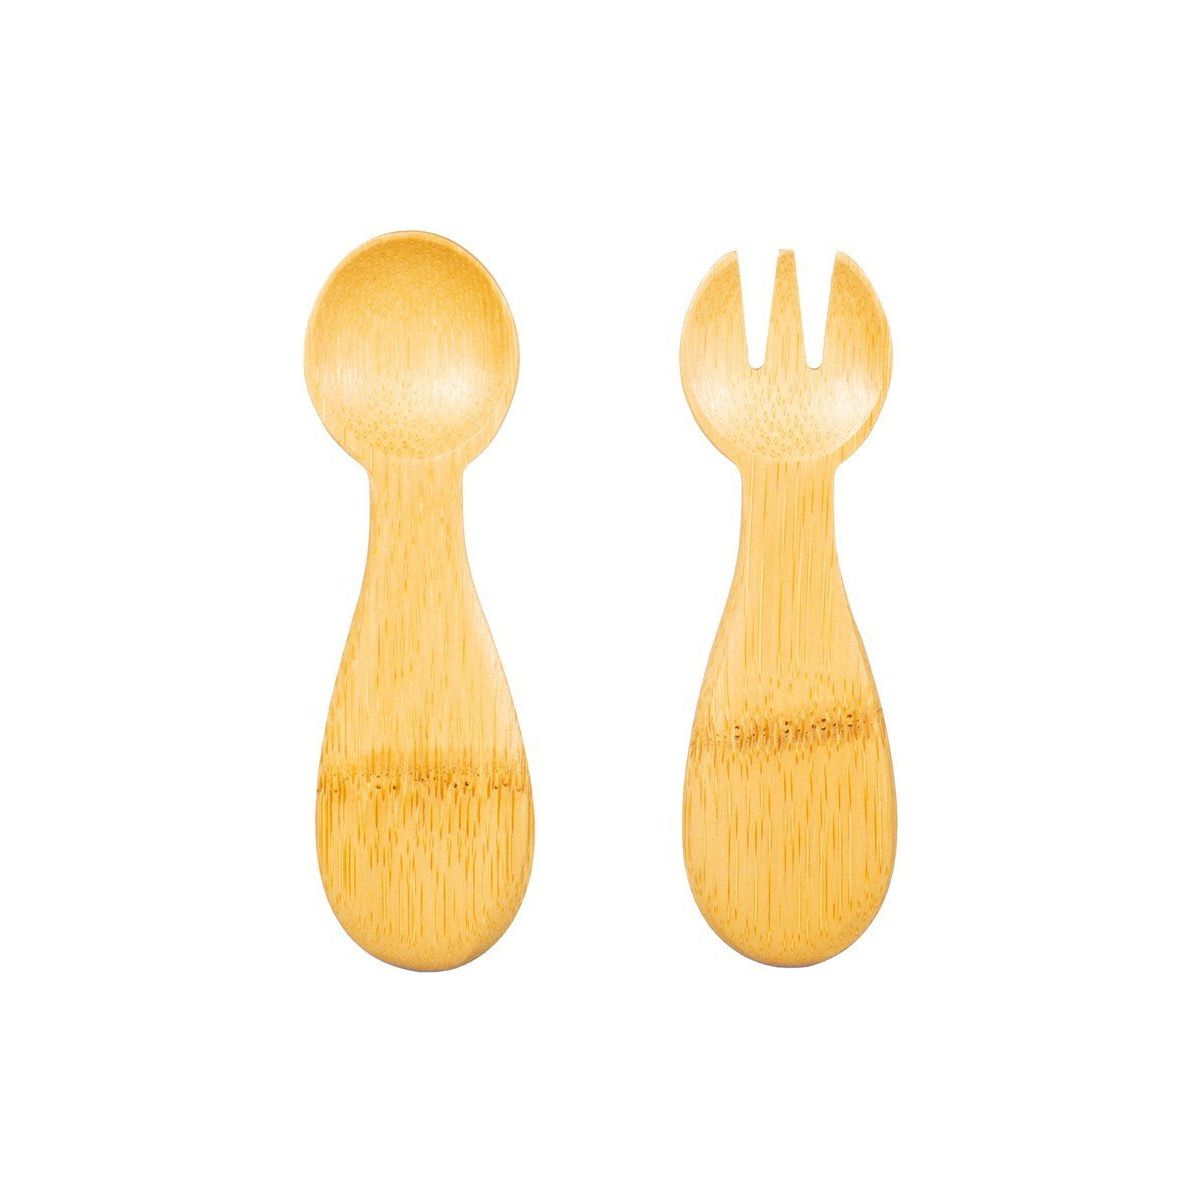 Kids Spoon and Fork - Set of 2 - Ashton and Finch